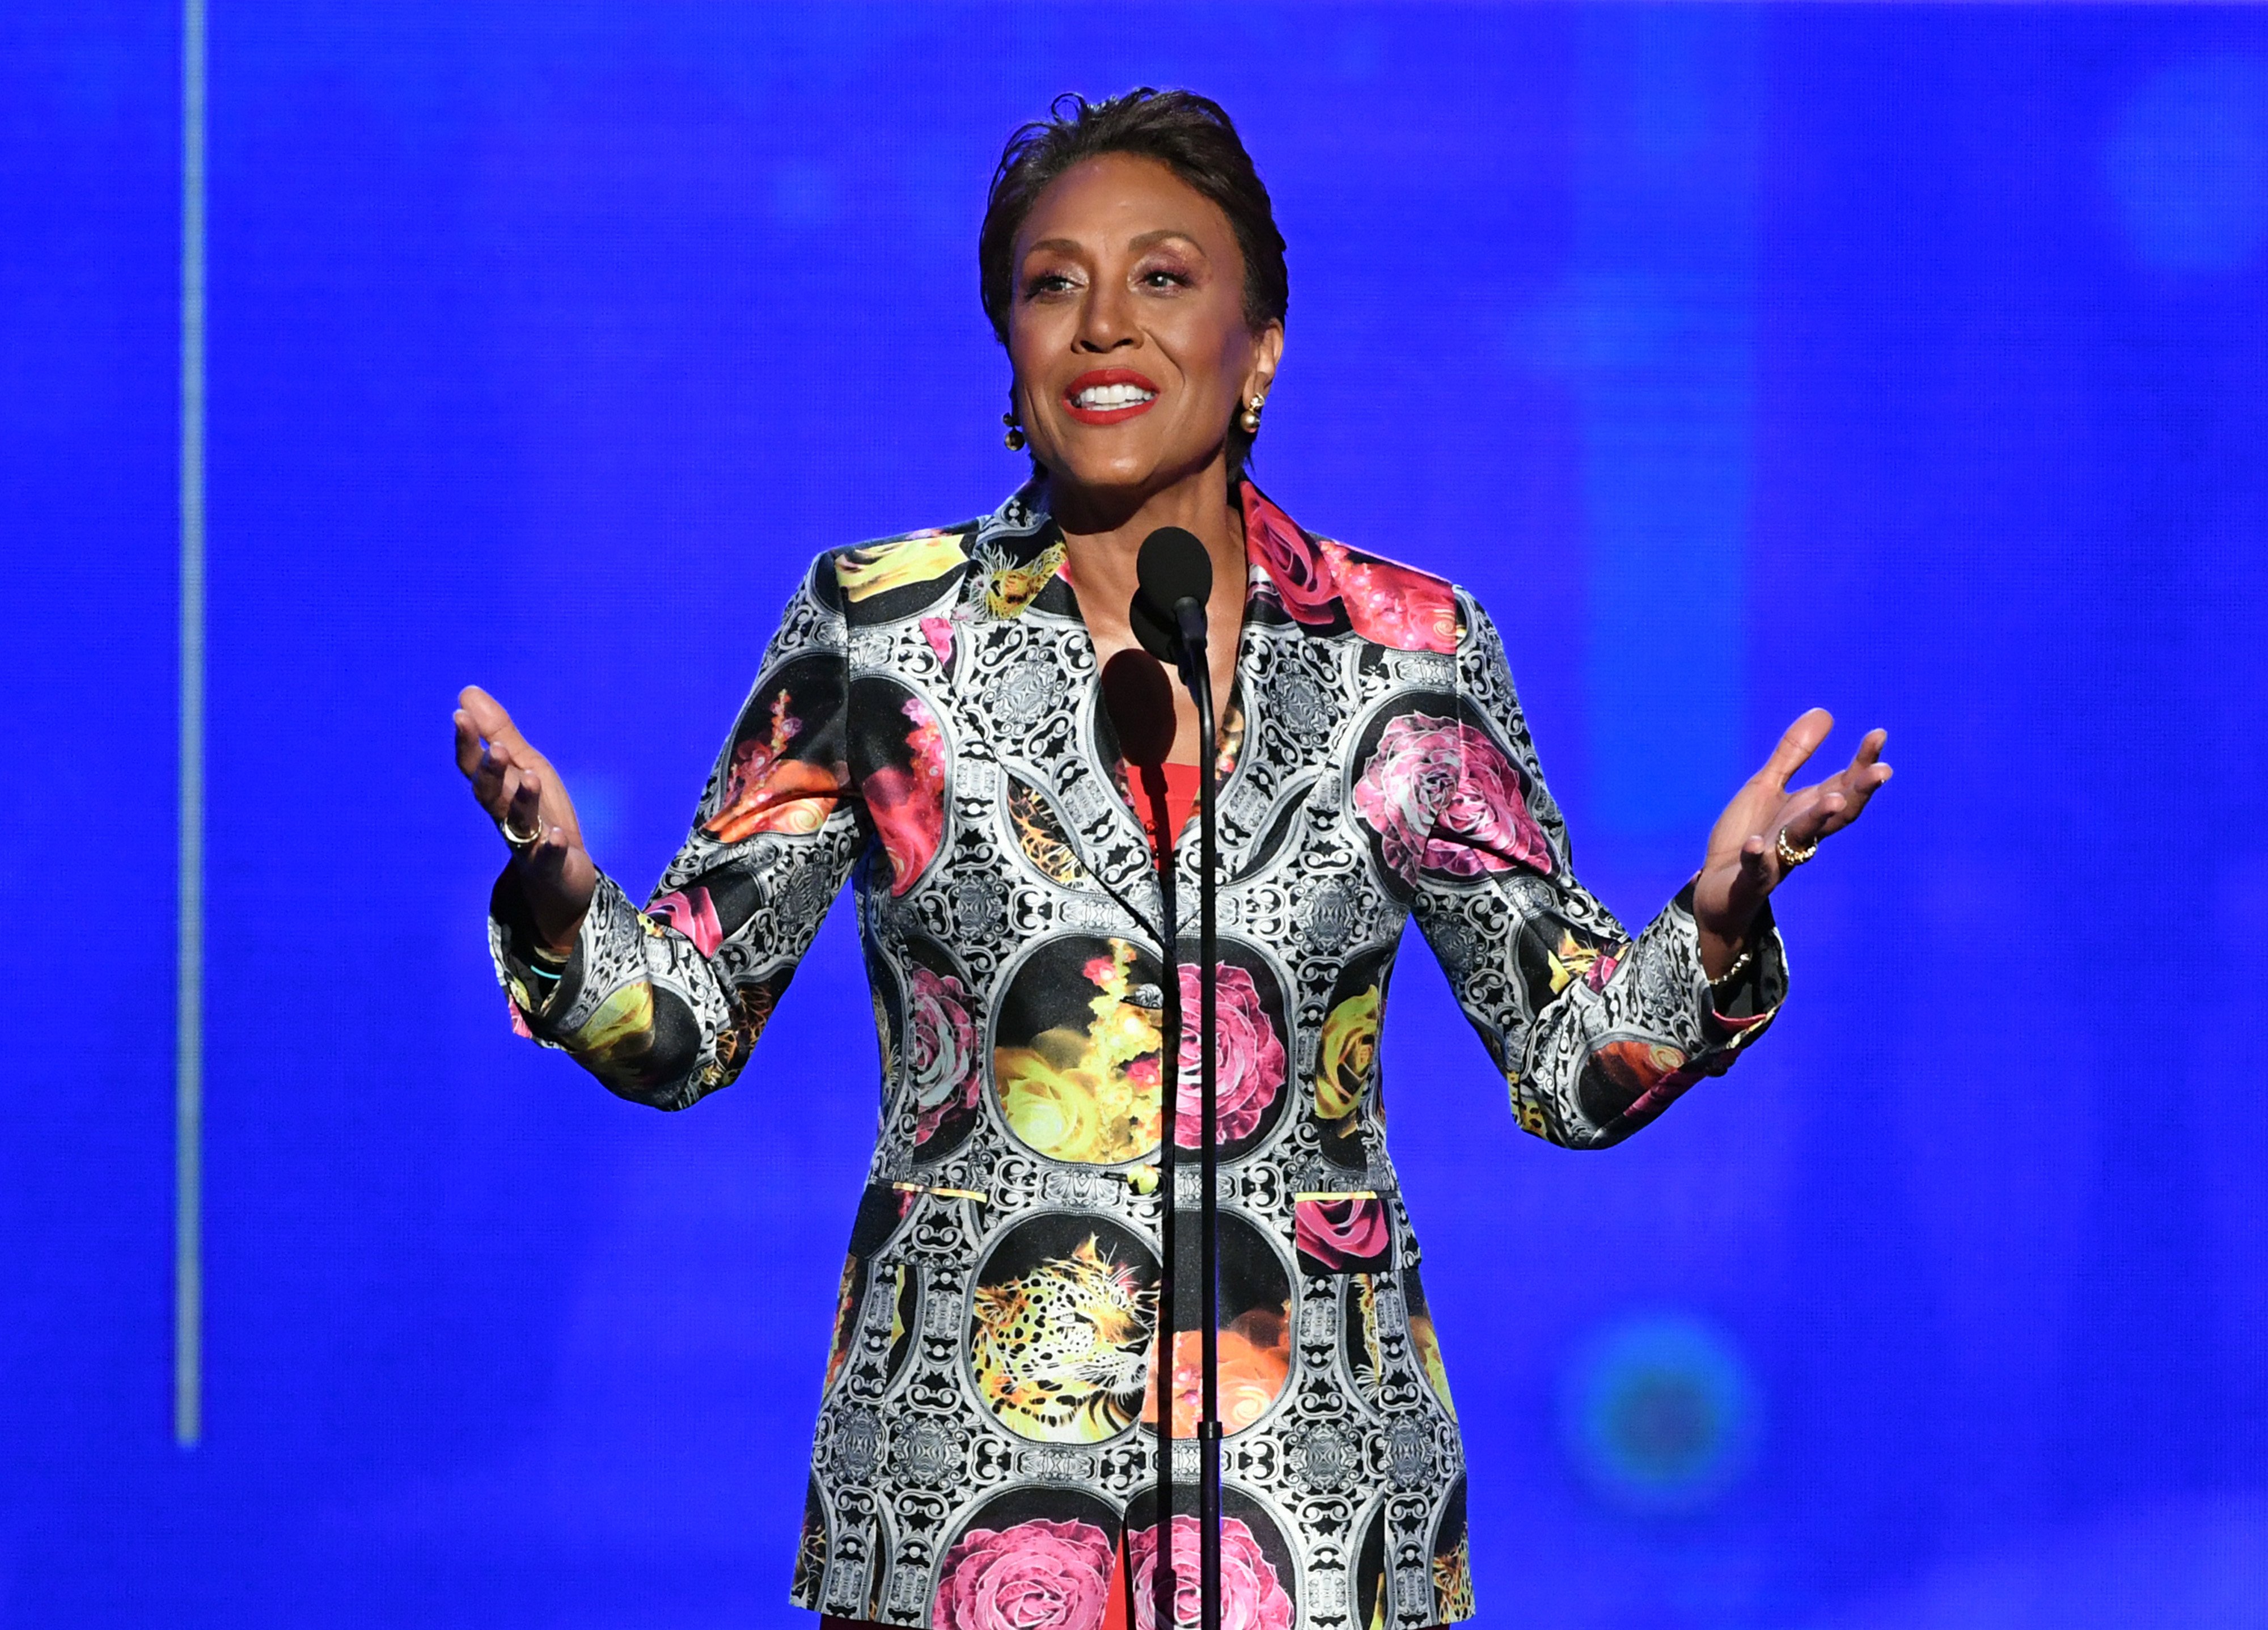 Robin Roberts of 'Good Morning America' in a multicolored dress standing at a microphone accepts the Sager Strong Award onstage during the 2019 NBA Awards presented by Kia on TNT at Barker Hangar